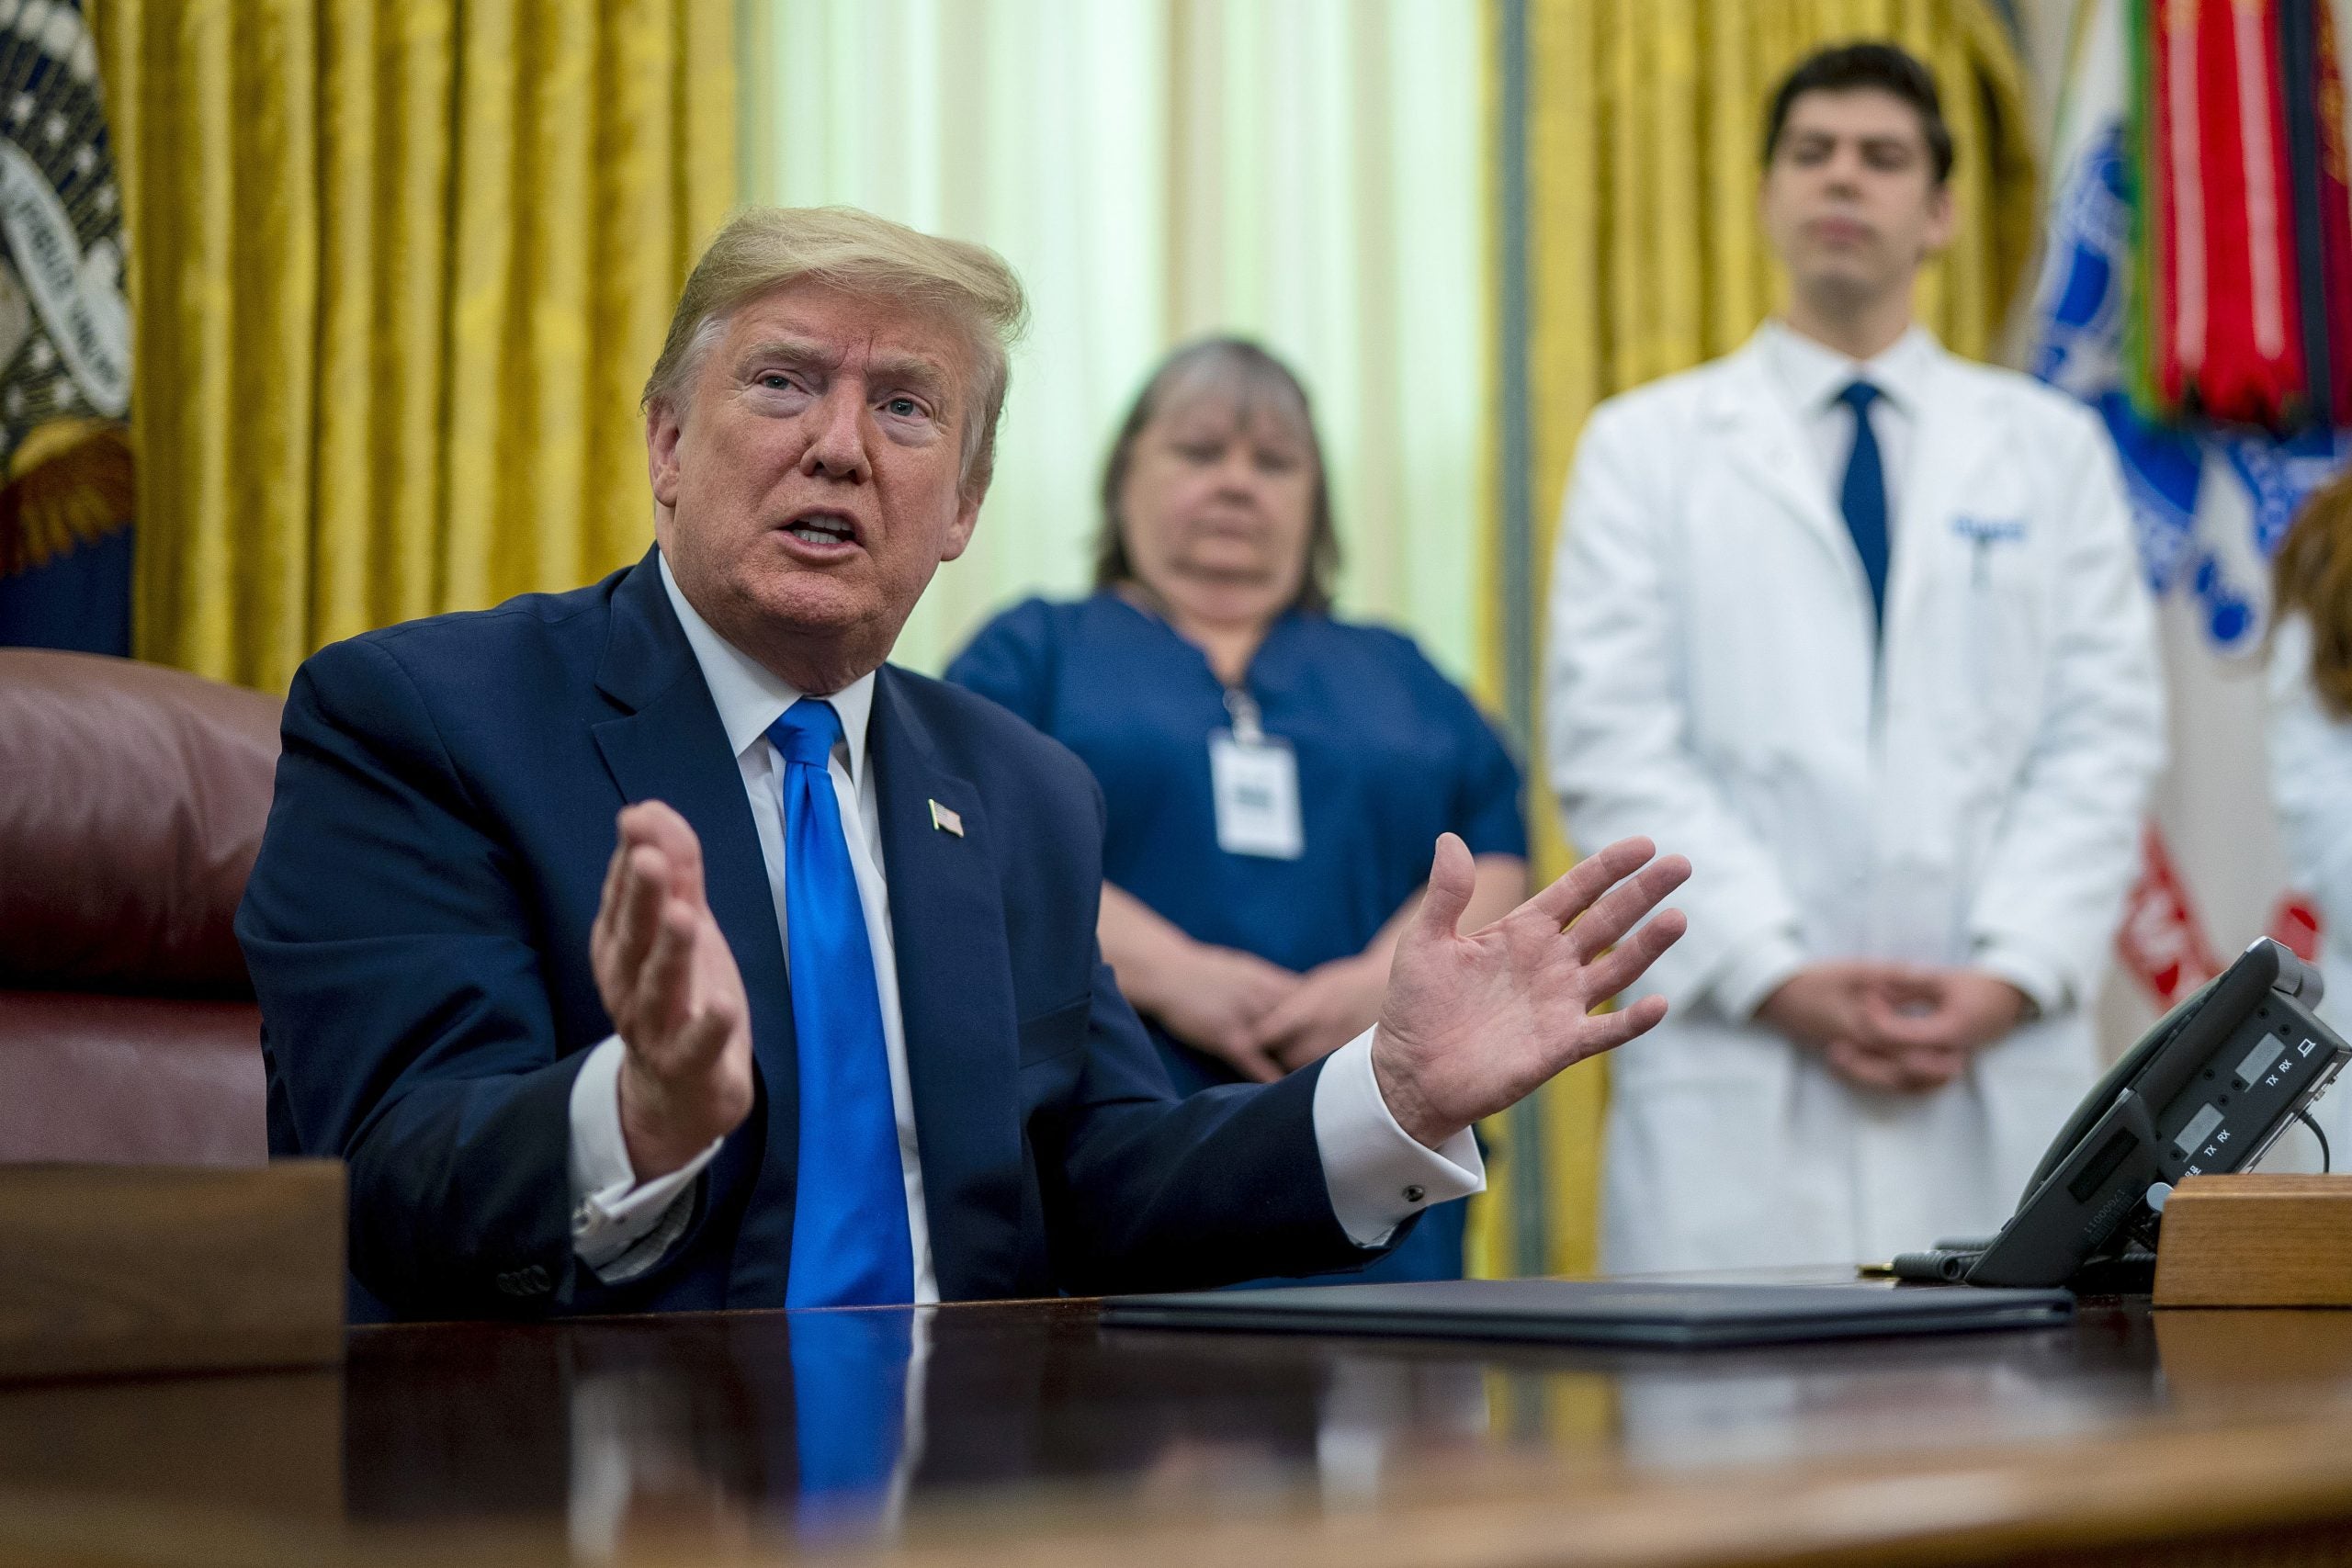 Trump Continues Push To Bring An End To Obamacare